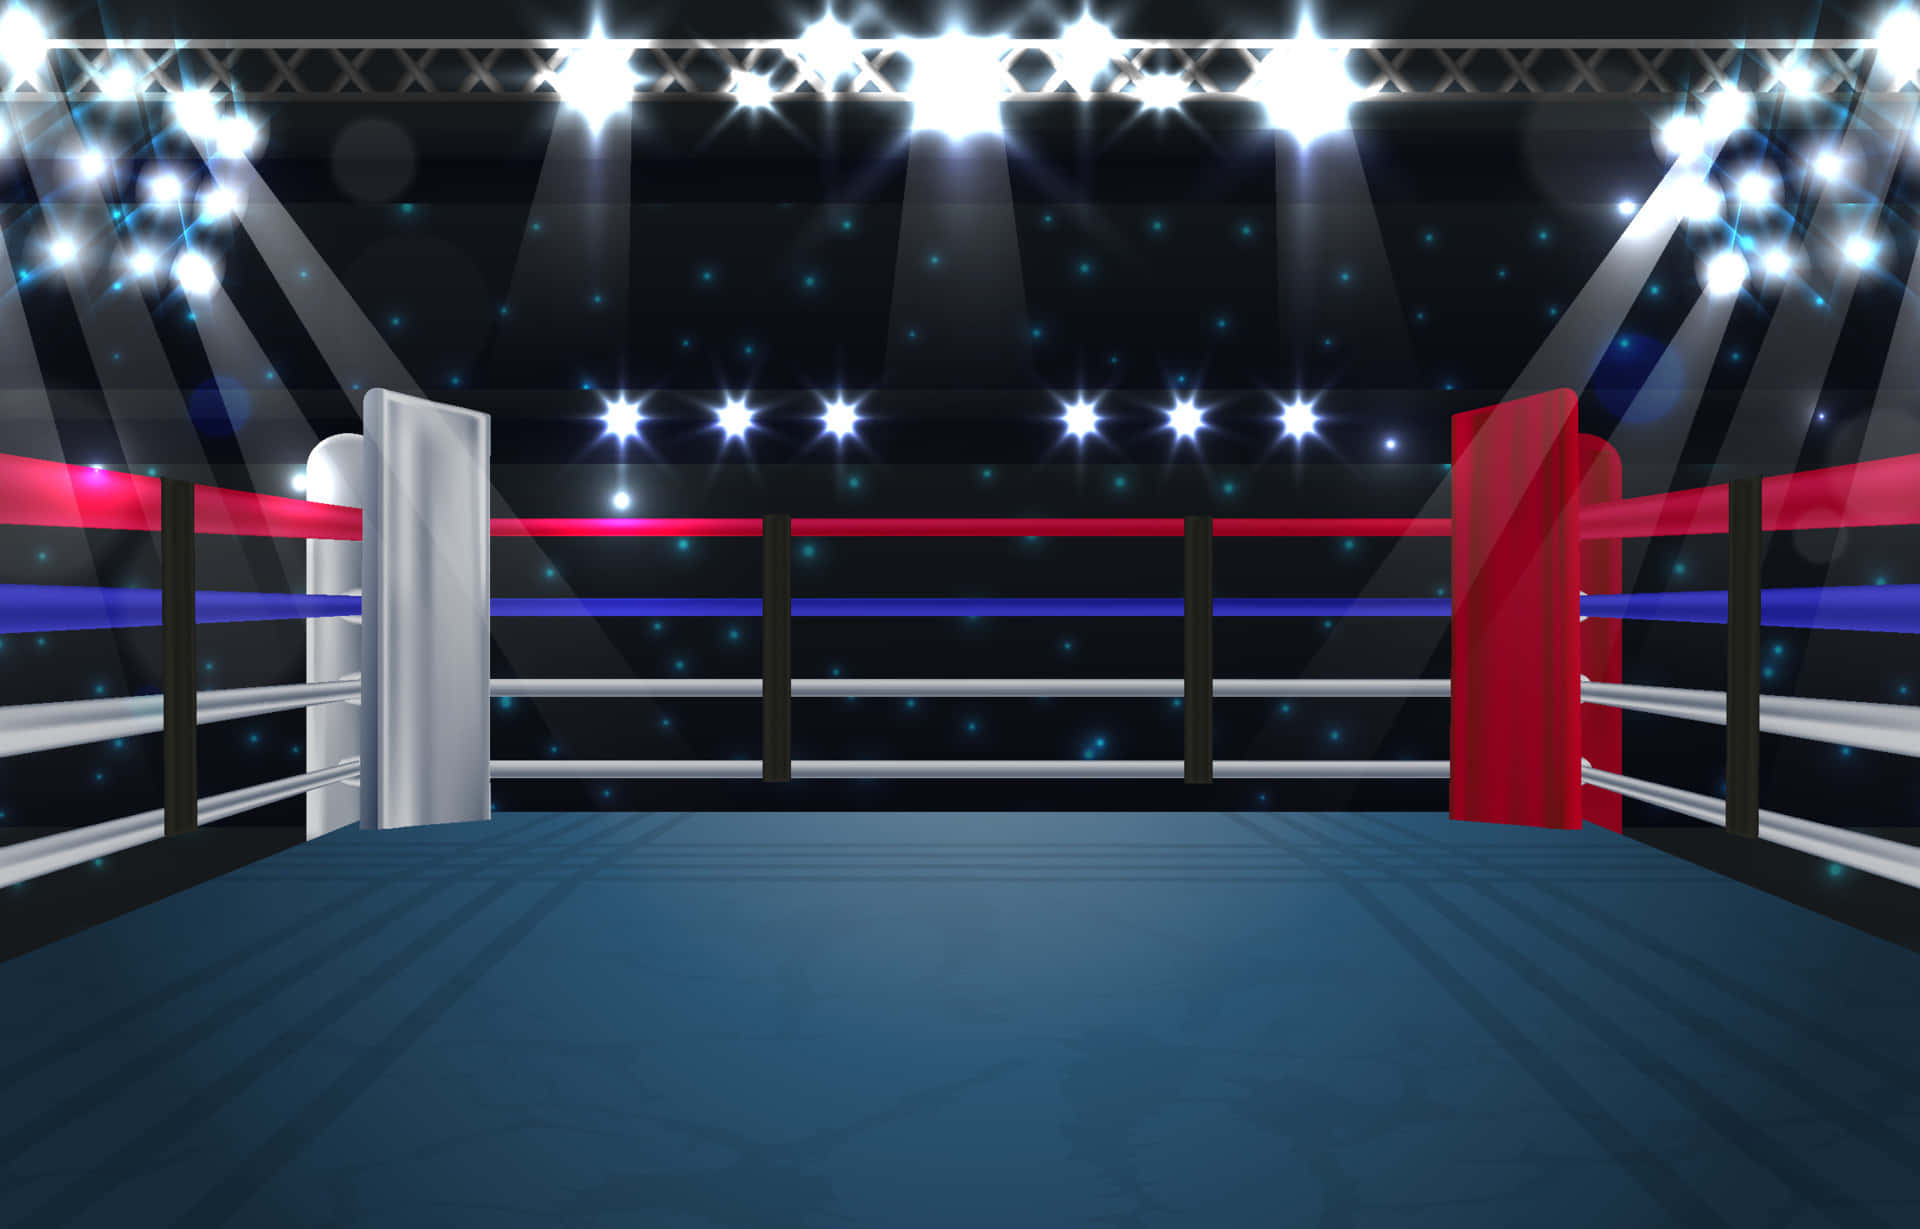 A Professional Boxing Ring Awaits the Next Fight